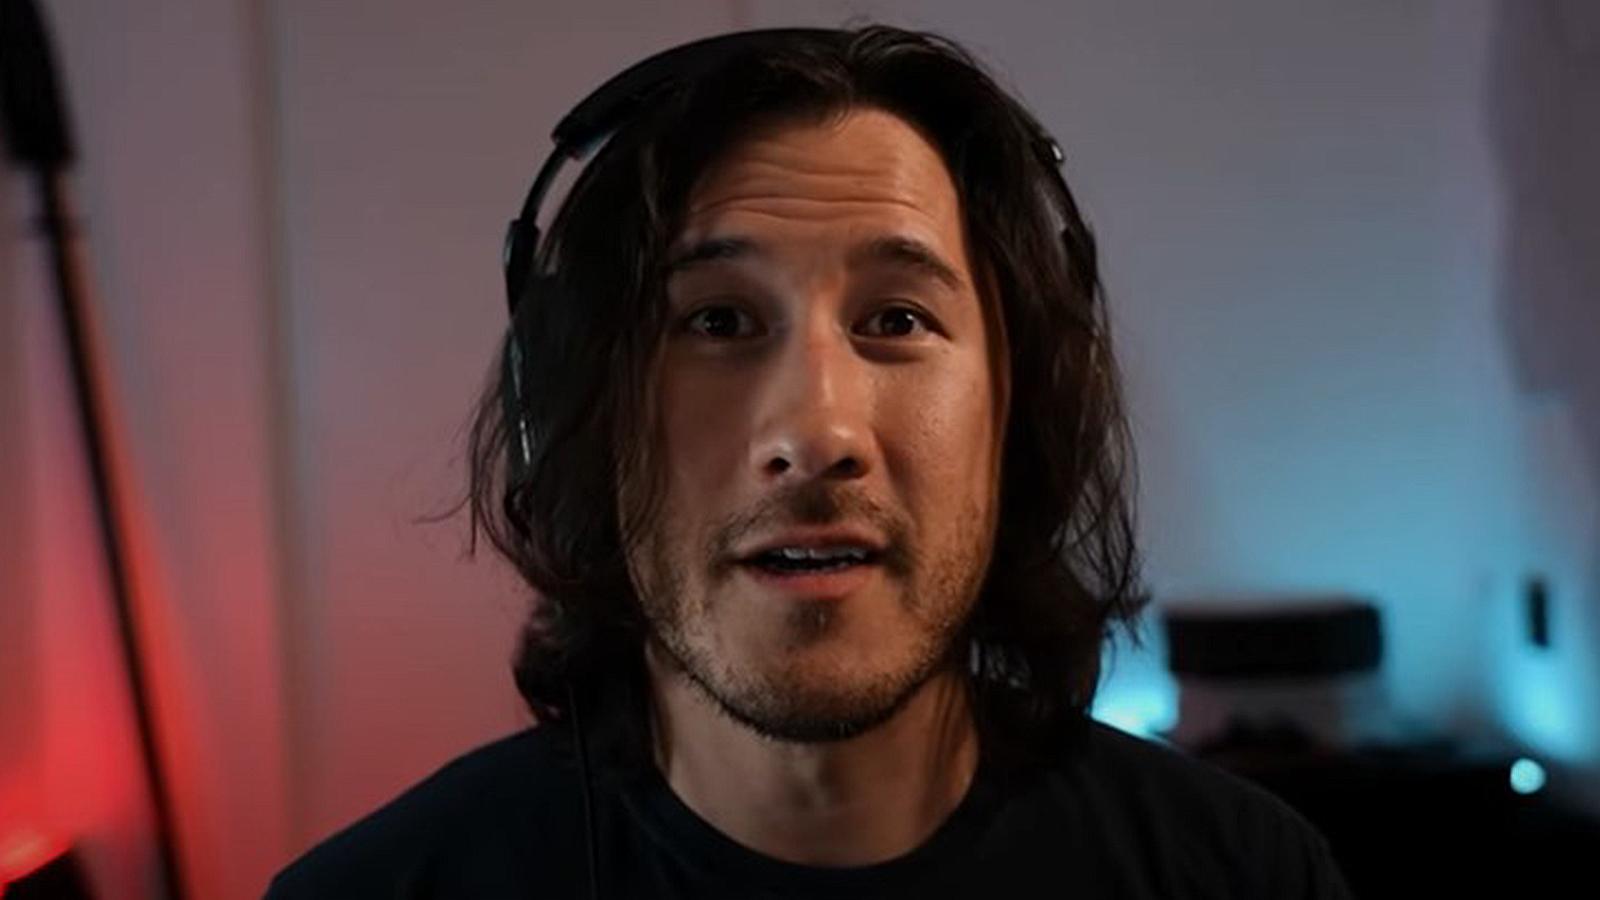 markiplier-says-iron-lung-movie-out-soon